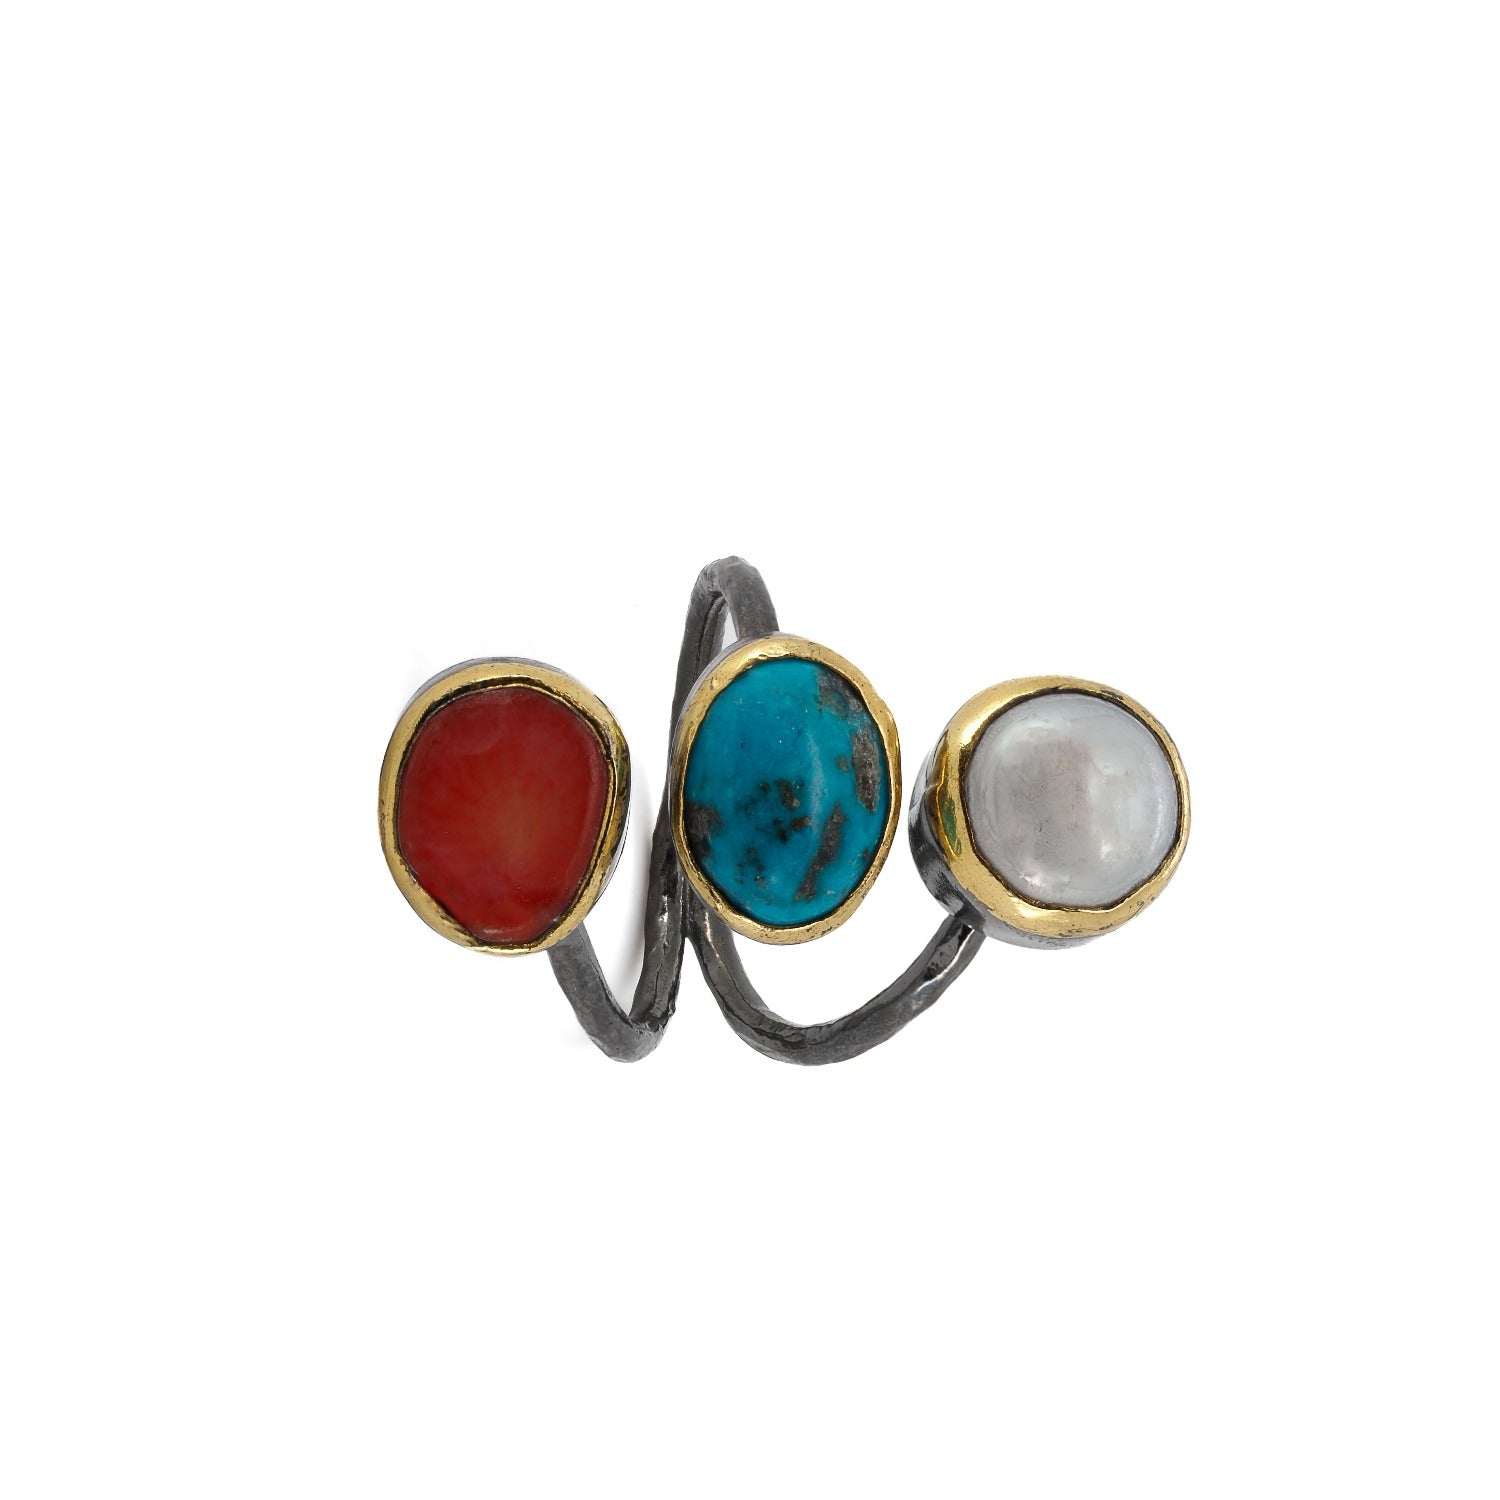 Triple Gemstone Sterling Silver Ring showcasing its exquisite design.